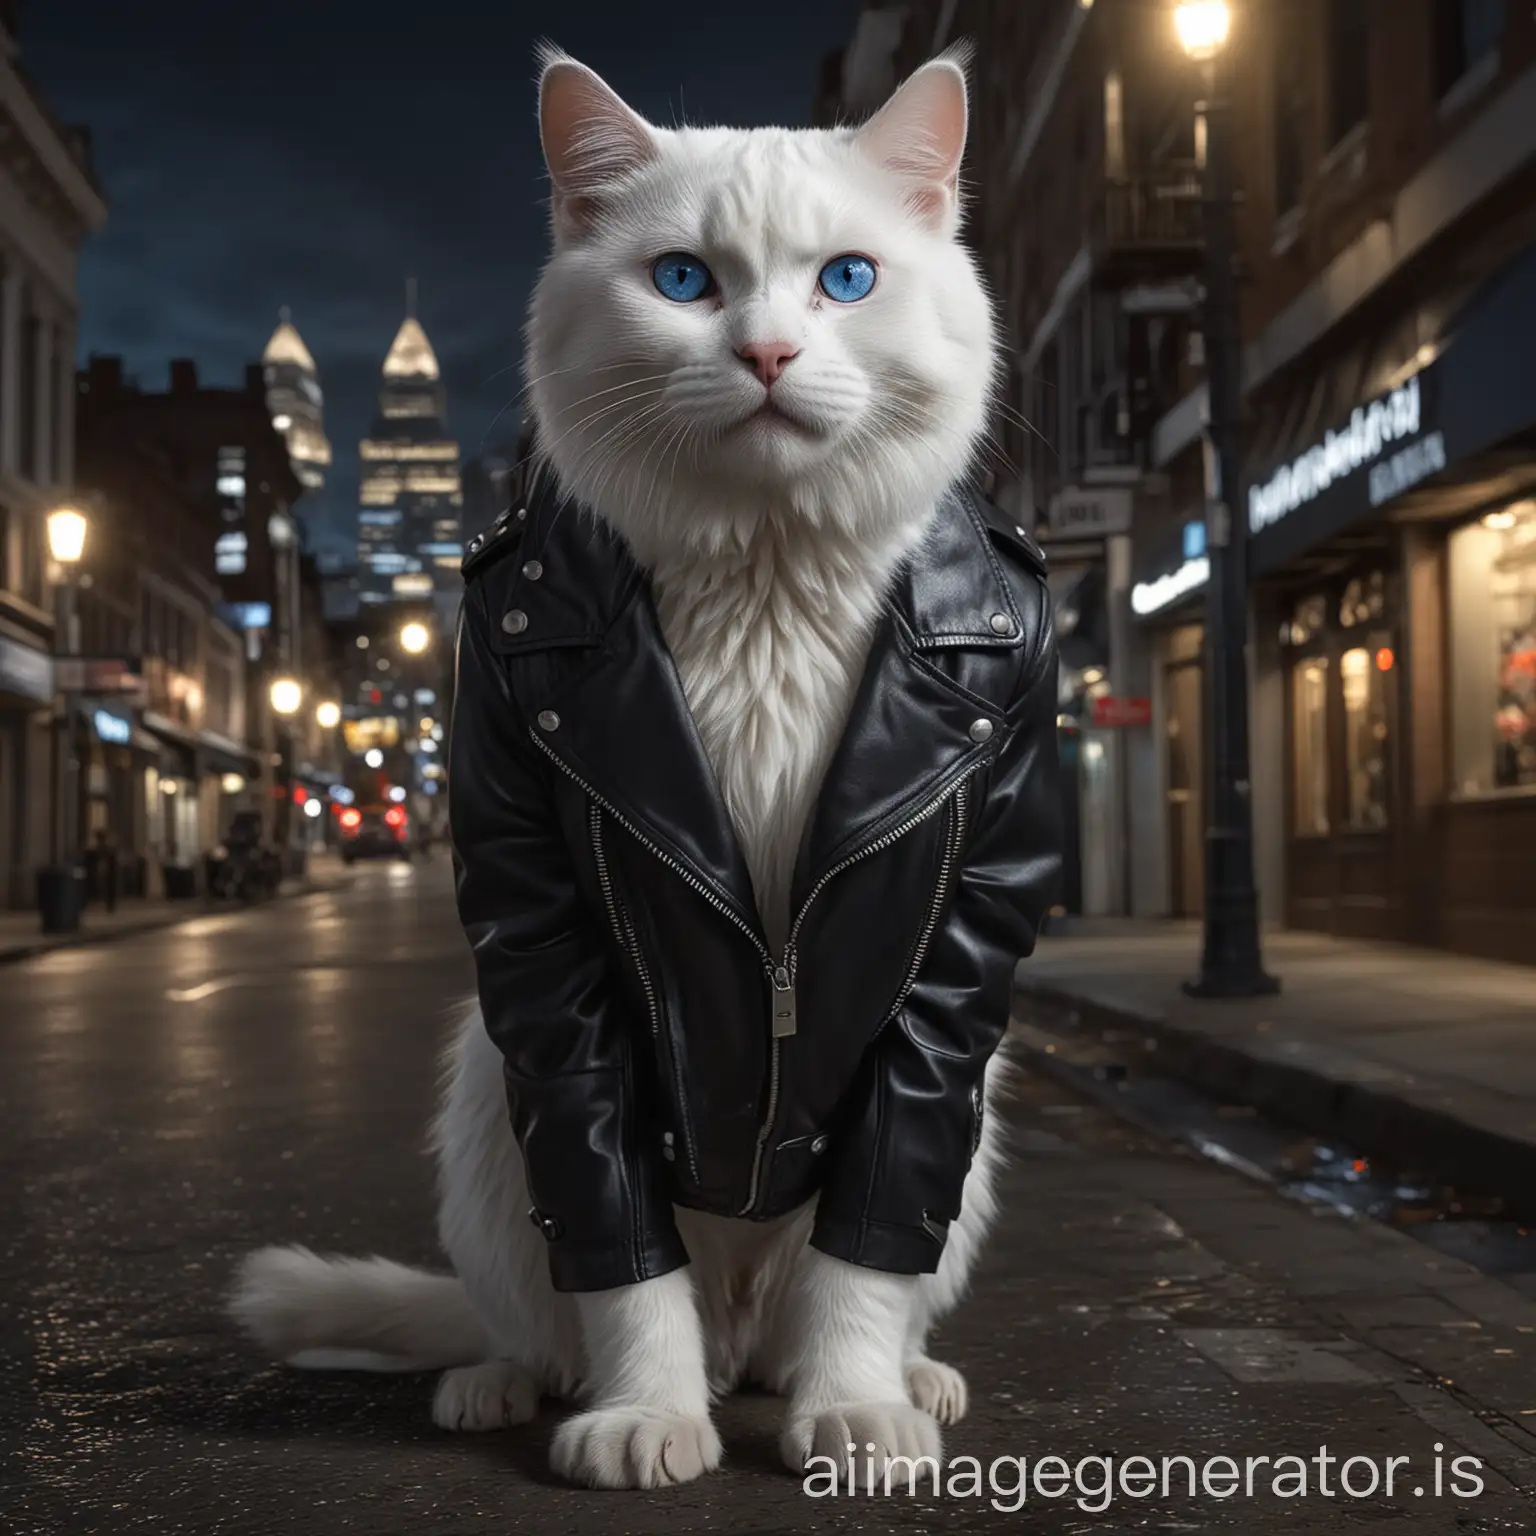 Urban-Night-Scene-White-Cat-in-Black-Leather-Jacket-Amidst-Downtown-Lights